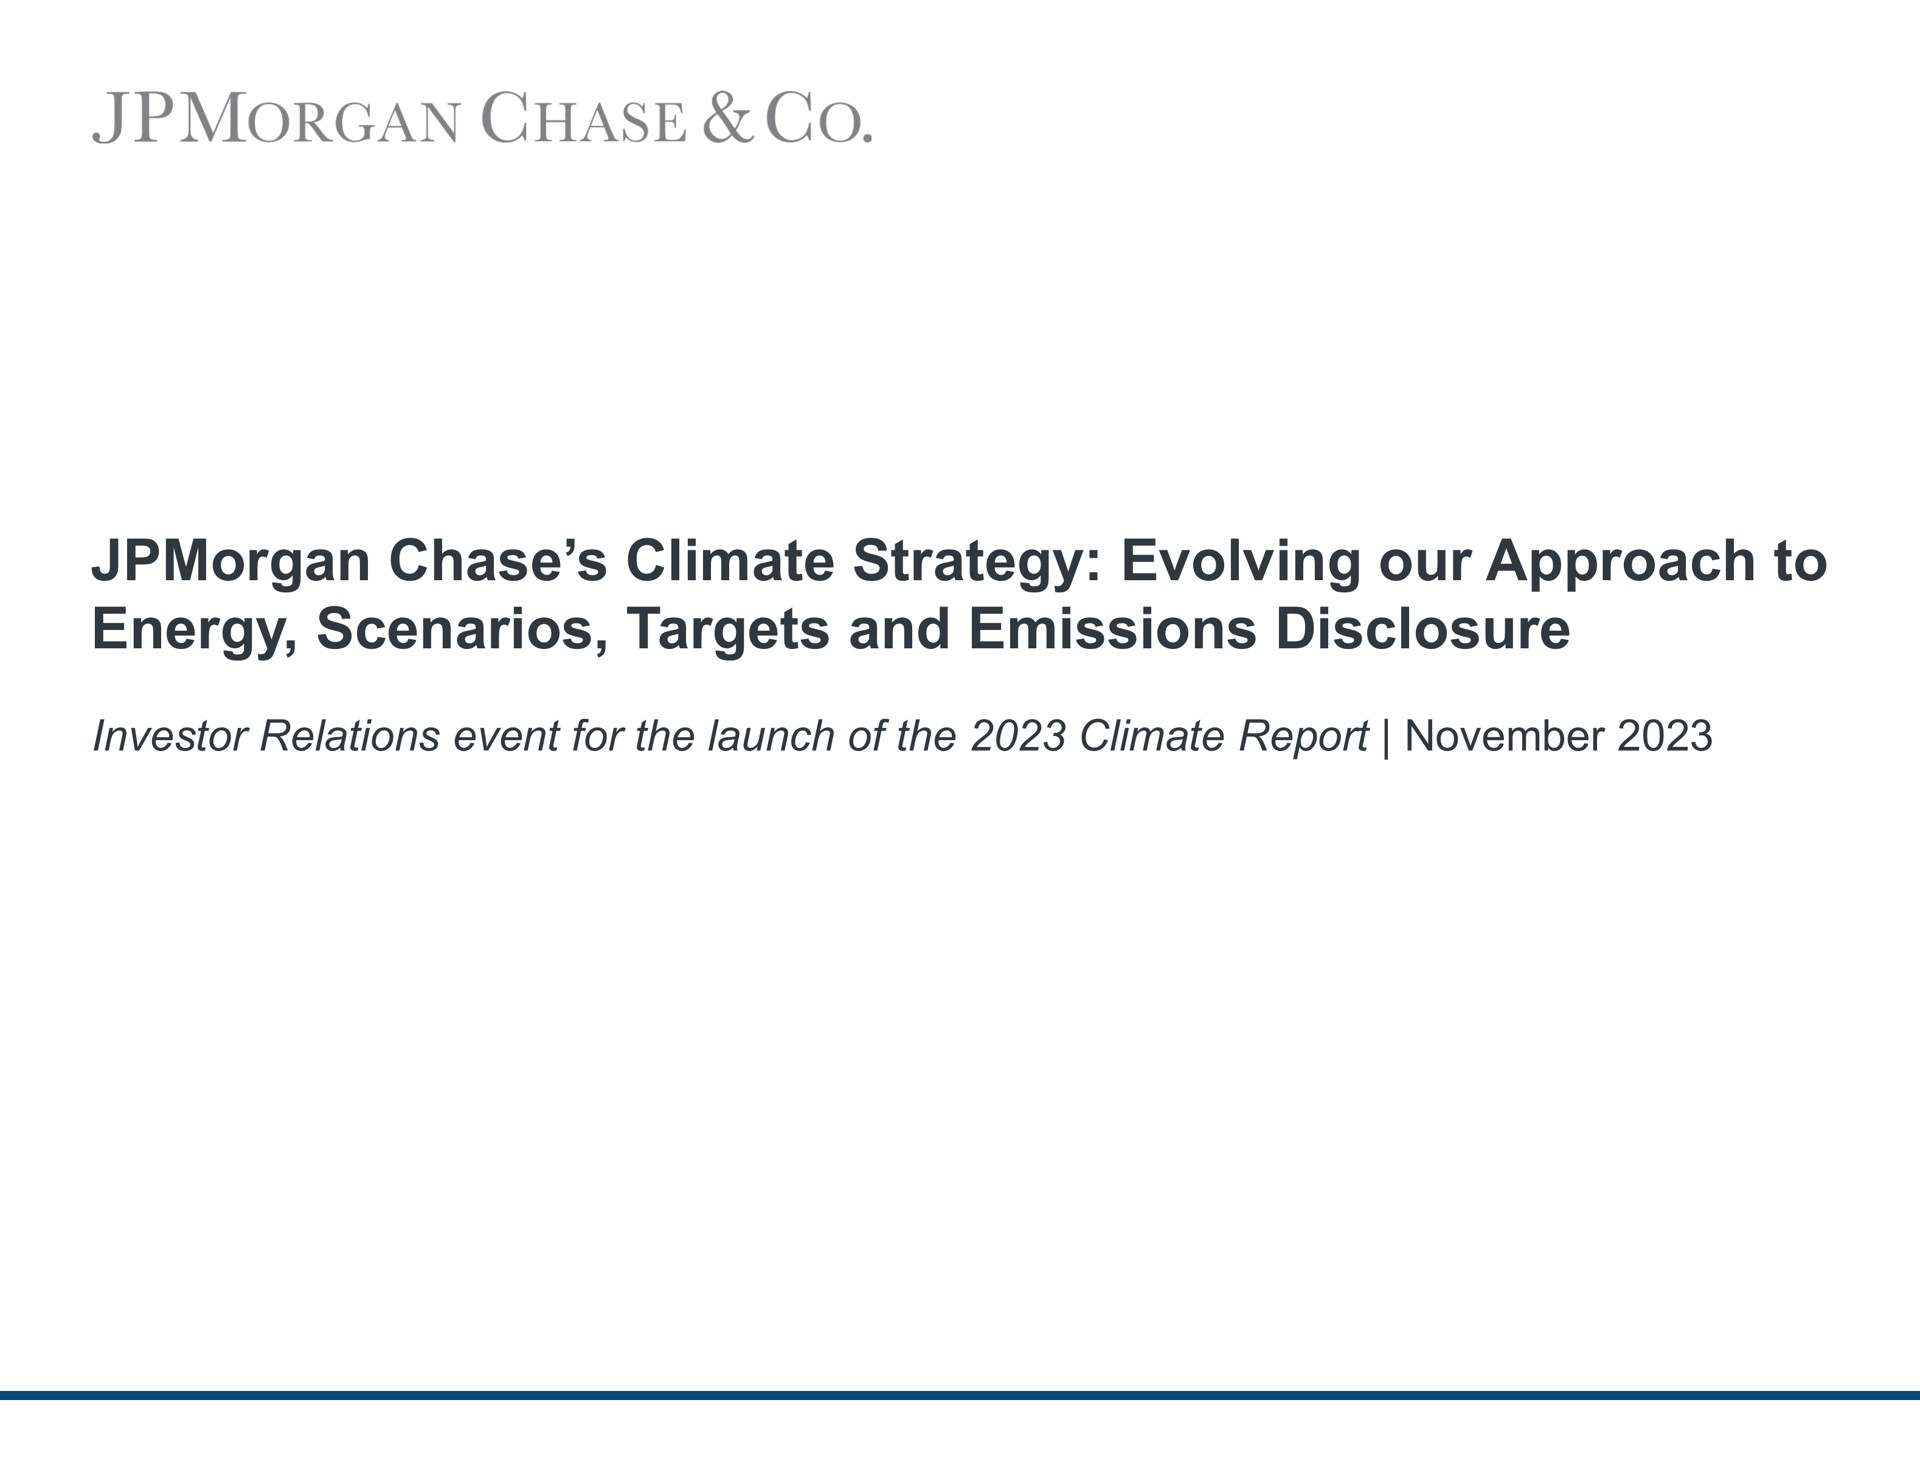 chase climate strategy evolving our approach to energy scenarios targets and emissions disclosure investor relations event for the launch of the climate report | J.P.Morgan